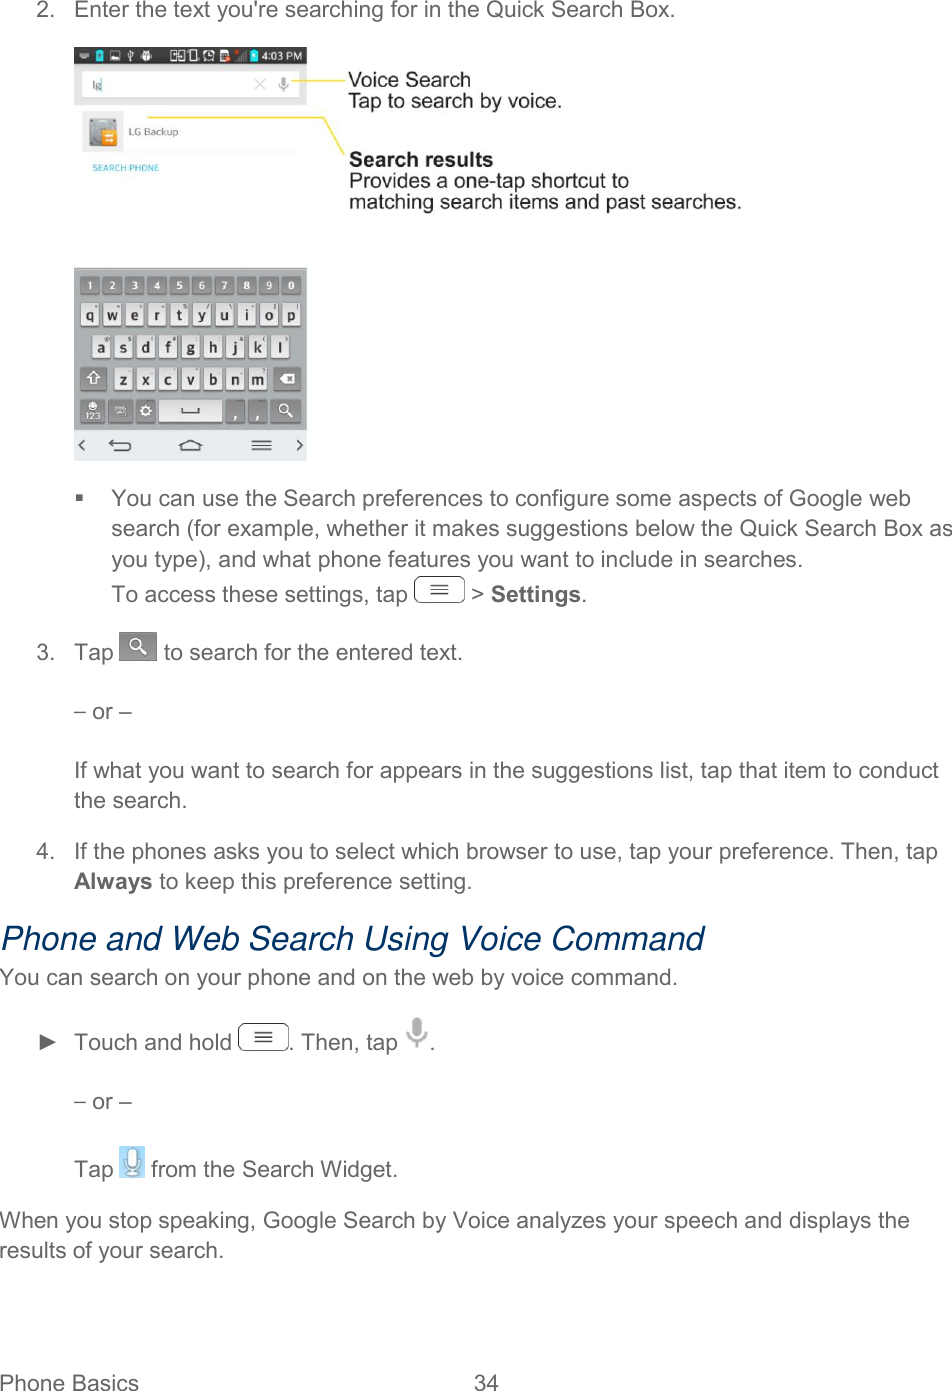  Phone Basics  34   2.  Enter the text you&apos;re searching for in the Quick Search Box.    You can use the Search preferences to configure some aspects of Google web search (for example, whether it makes suggestions below the Quick Search Box as you type), and what phone features you want to include in searches. To access these settings, tap   &gt; Settings. 3.  Tap   to search for the entered text. – or – If what you want to search for appears in the suggestions list, tap that item to conduct the search. 4.  If the phones asks you to select which browser to use, tap your preference. Then, tap Always to keep this preference setting. Phone and Web Search Using Voice Command You can search on your phone and on the web by voice command. ►  Touch and hold  . Then, tap  . – or – Tap   from the Search Widget. When you stop speaking, Google Search by Voice analyzes your speech and displays the results of your search.    